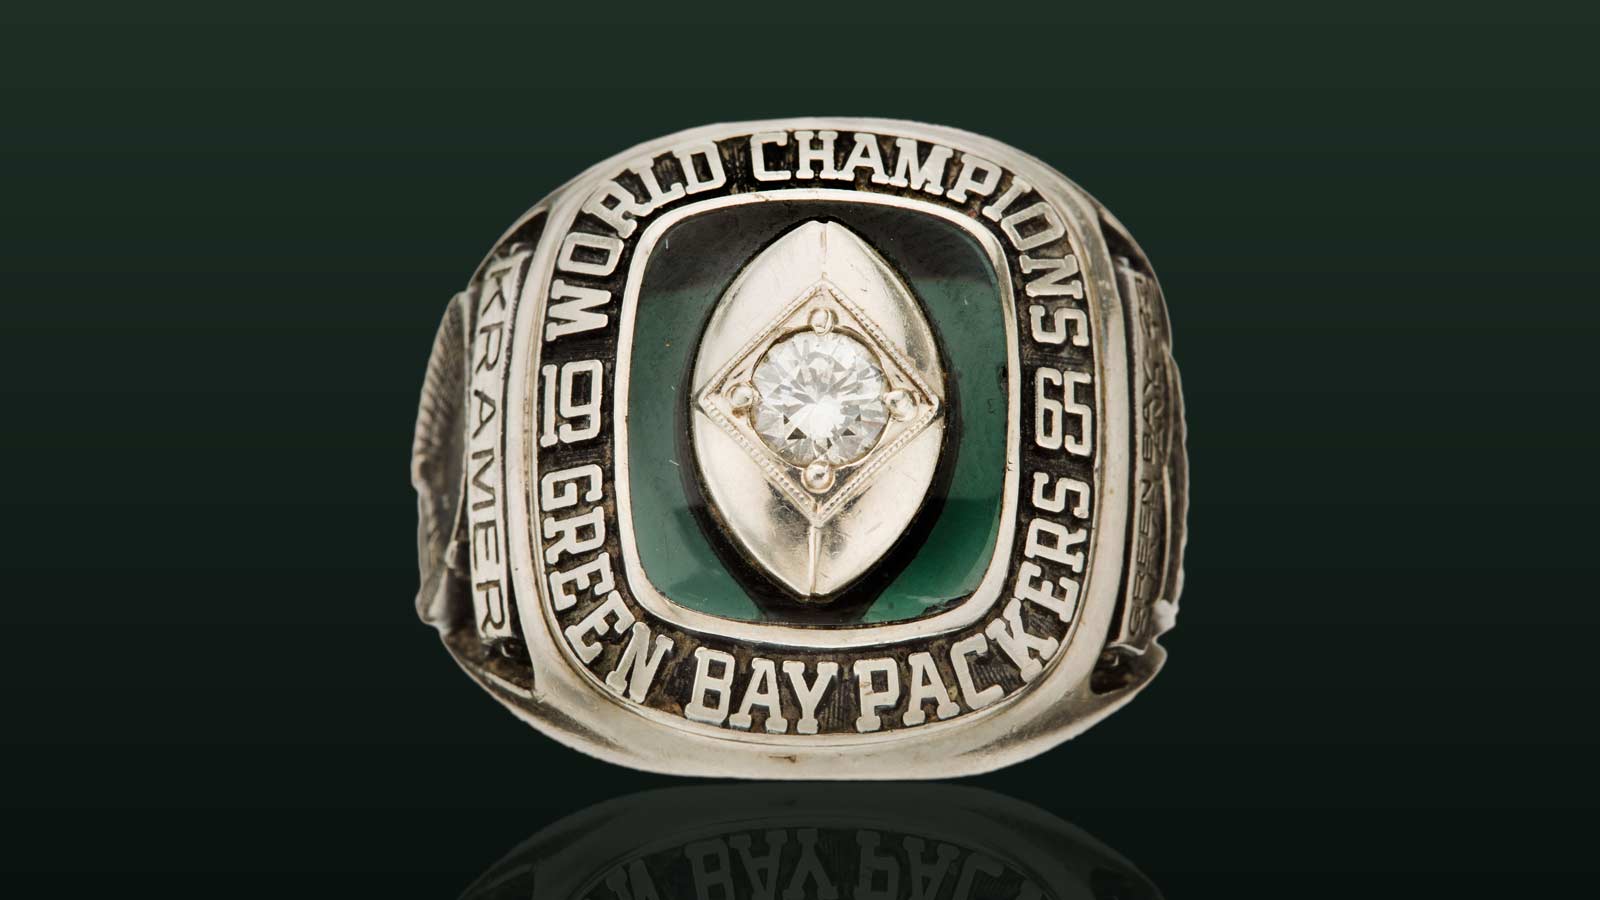 1965 Green Bay Packers World Championship Ring Presented to Jerry Kramer